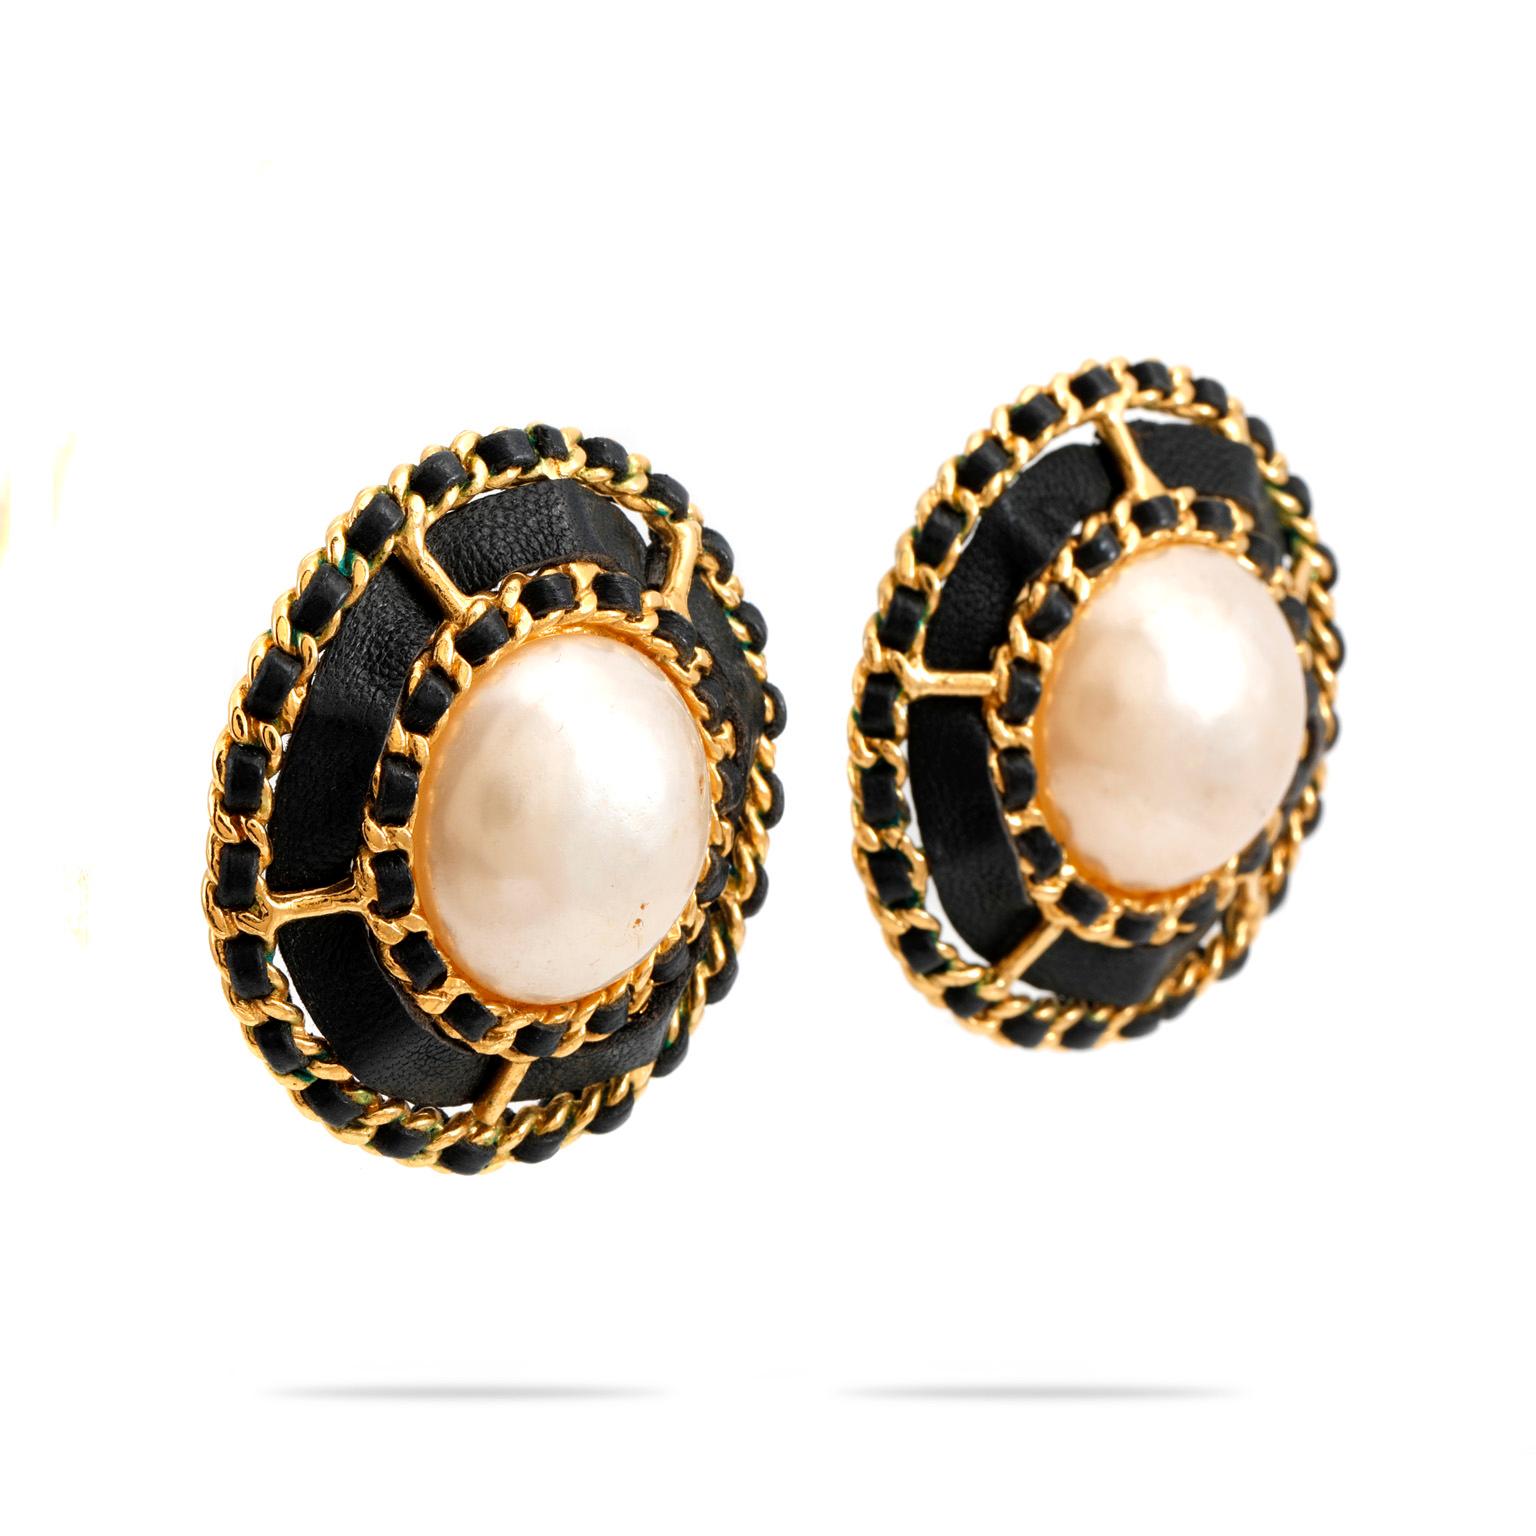 These authentic Chanel Large Pearl Earrings with Leather and Chain Surround are in excellent vintage condition.  Large faux pearl button earrings are surrounded by back lambskin and gold link chain detail.  Classic Chanel.  Clip on style.  Pouch or